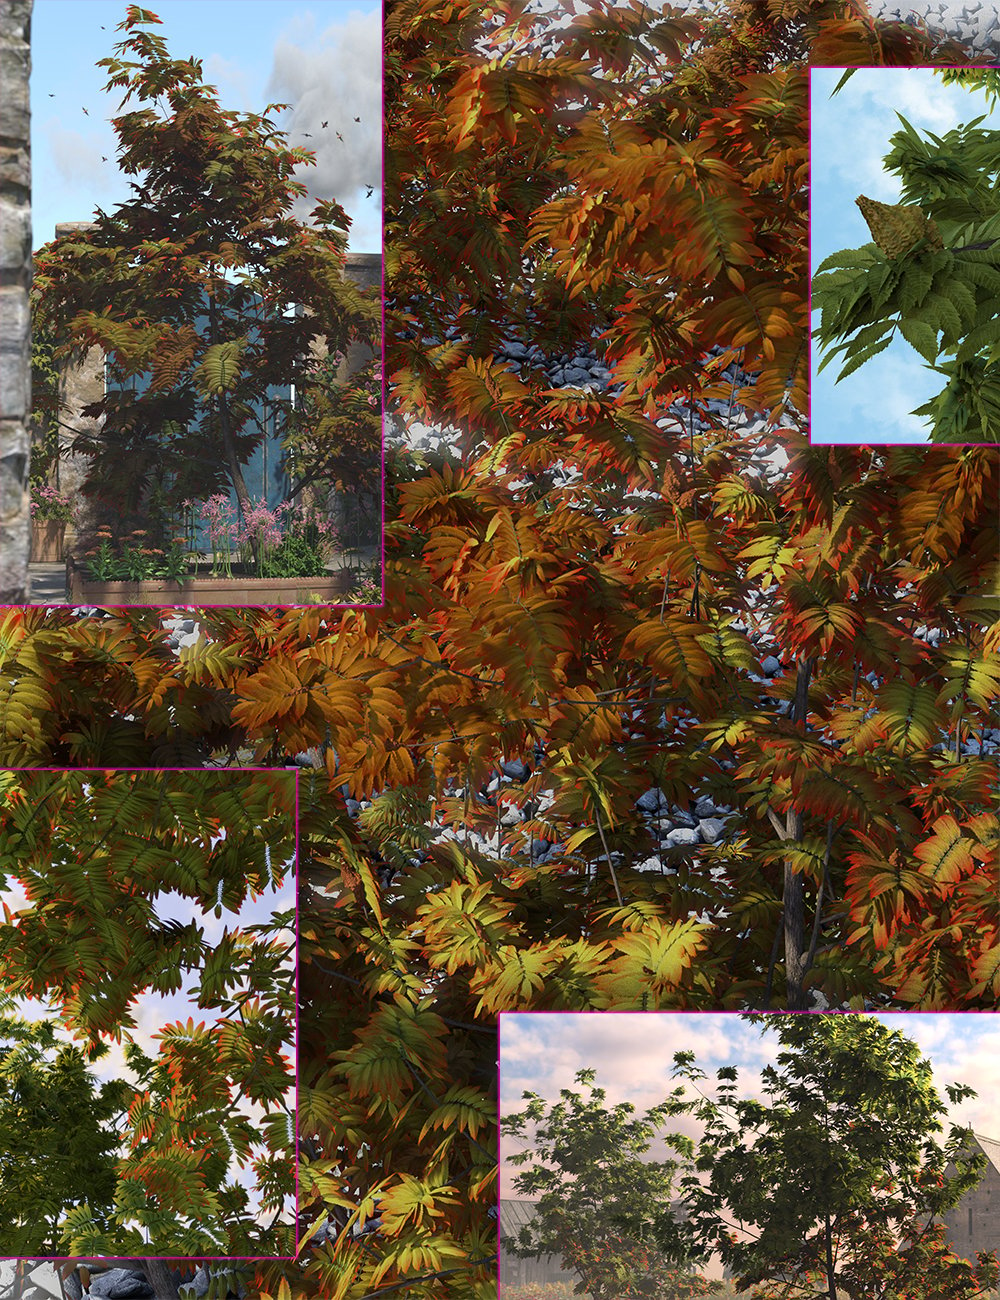 Prairie Shrubs and Trees - Sumac by: MartinJFrost, 3D Models by Daz 3D